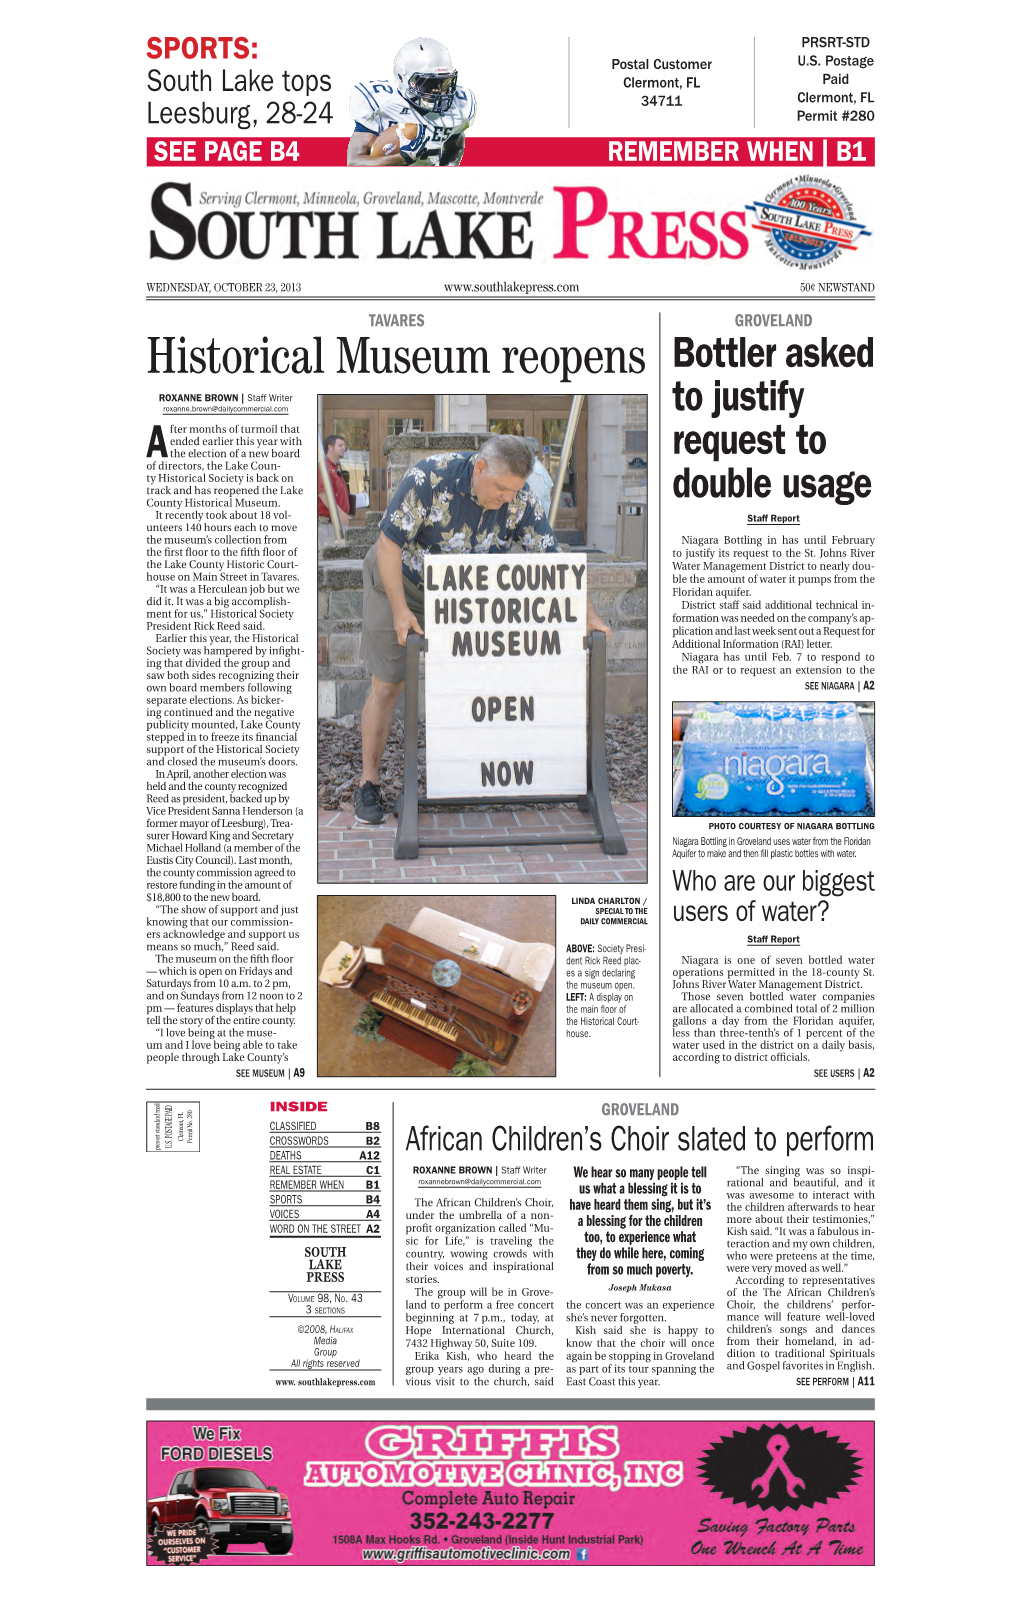 Historical Museum Reopens